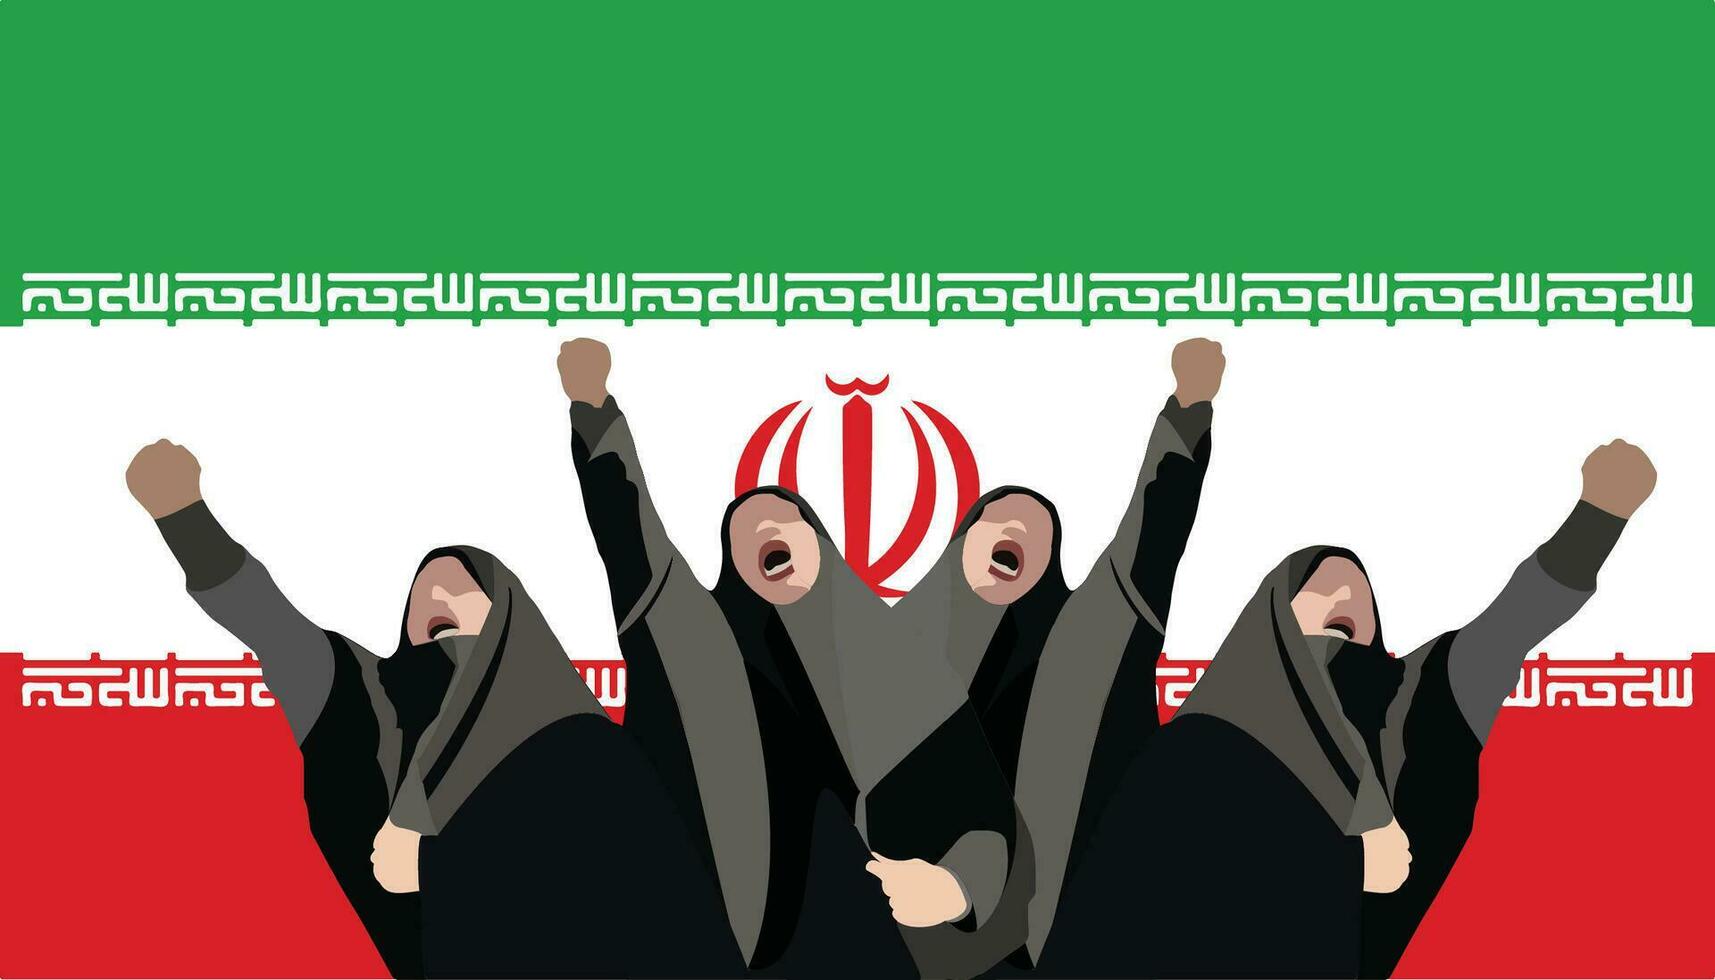 Iranian women with raised fists protest against power- vector